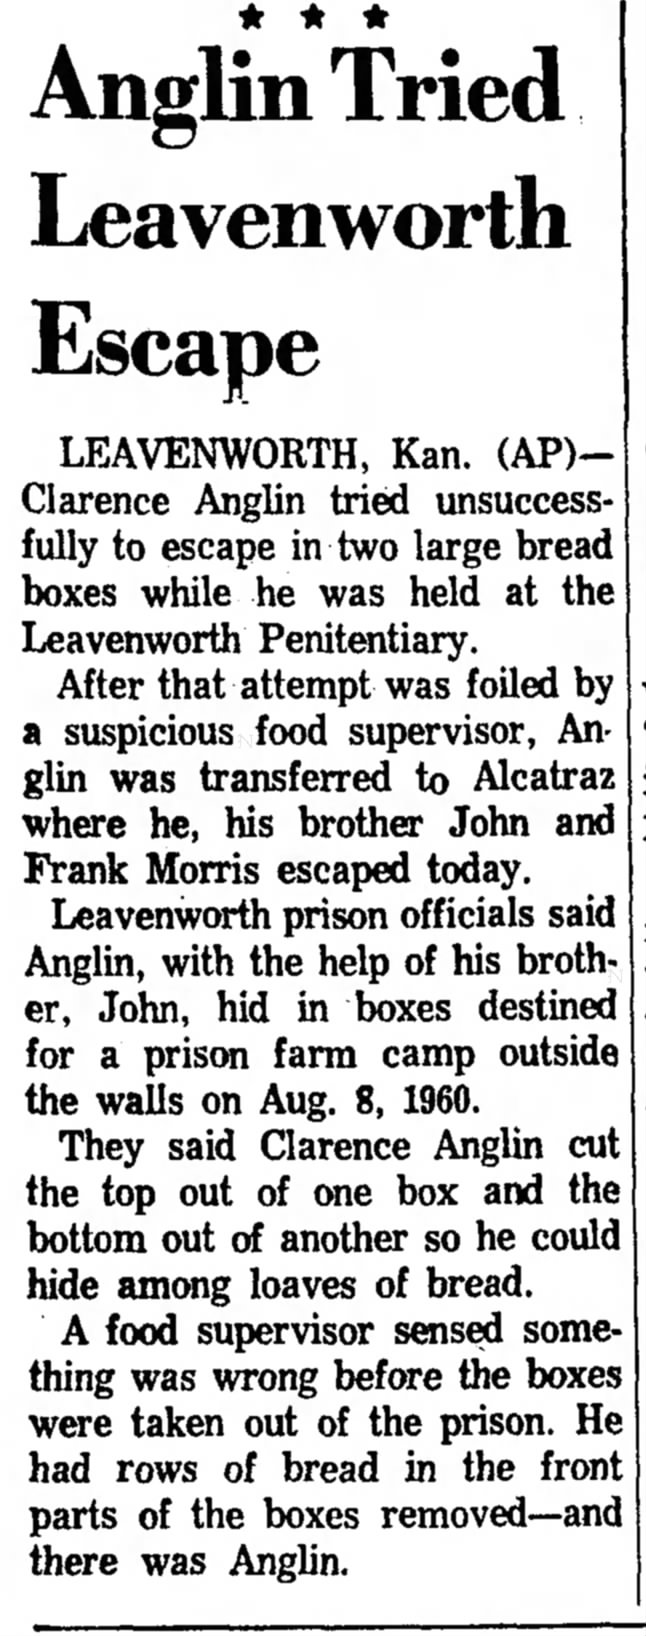 Clarence Anglin escape from Leavenworth.  June 12, 1962 newspaper